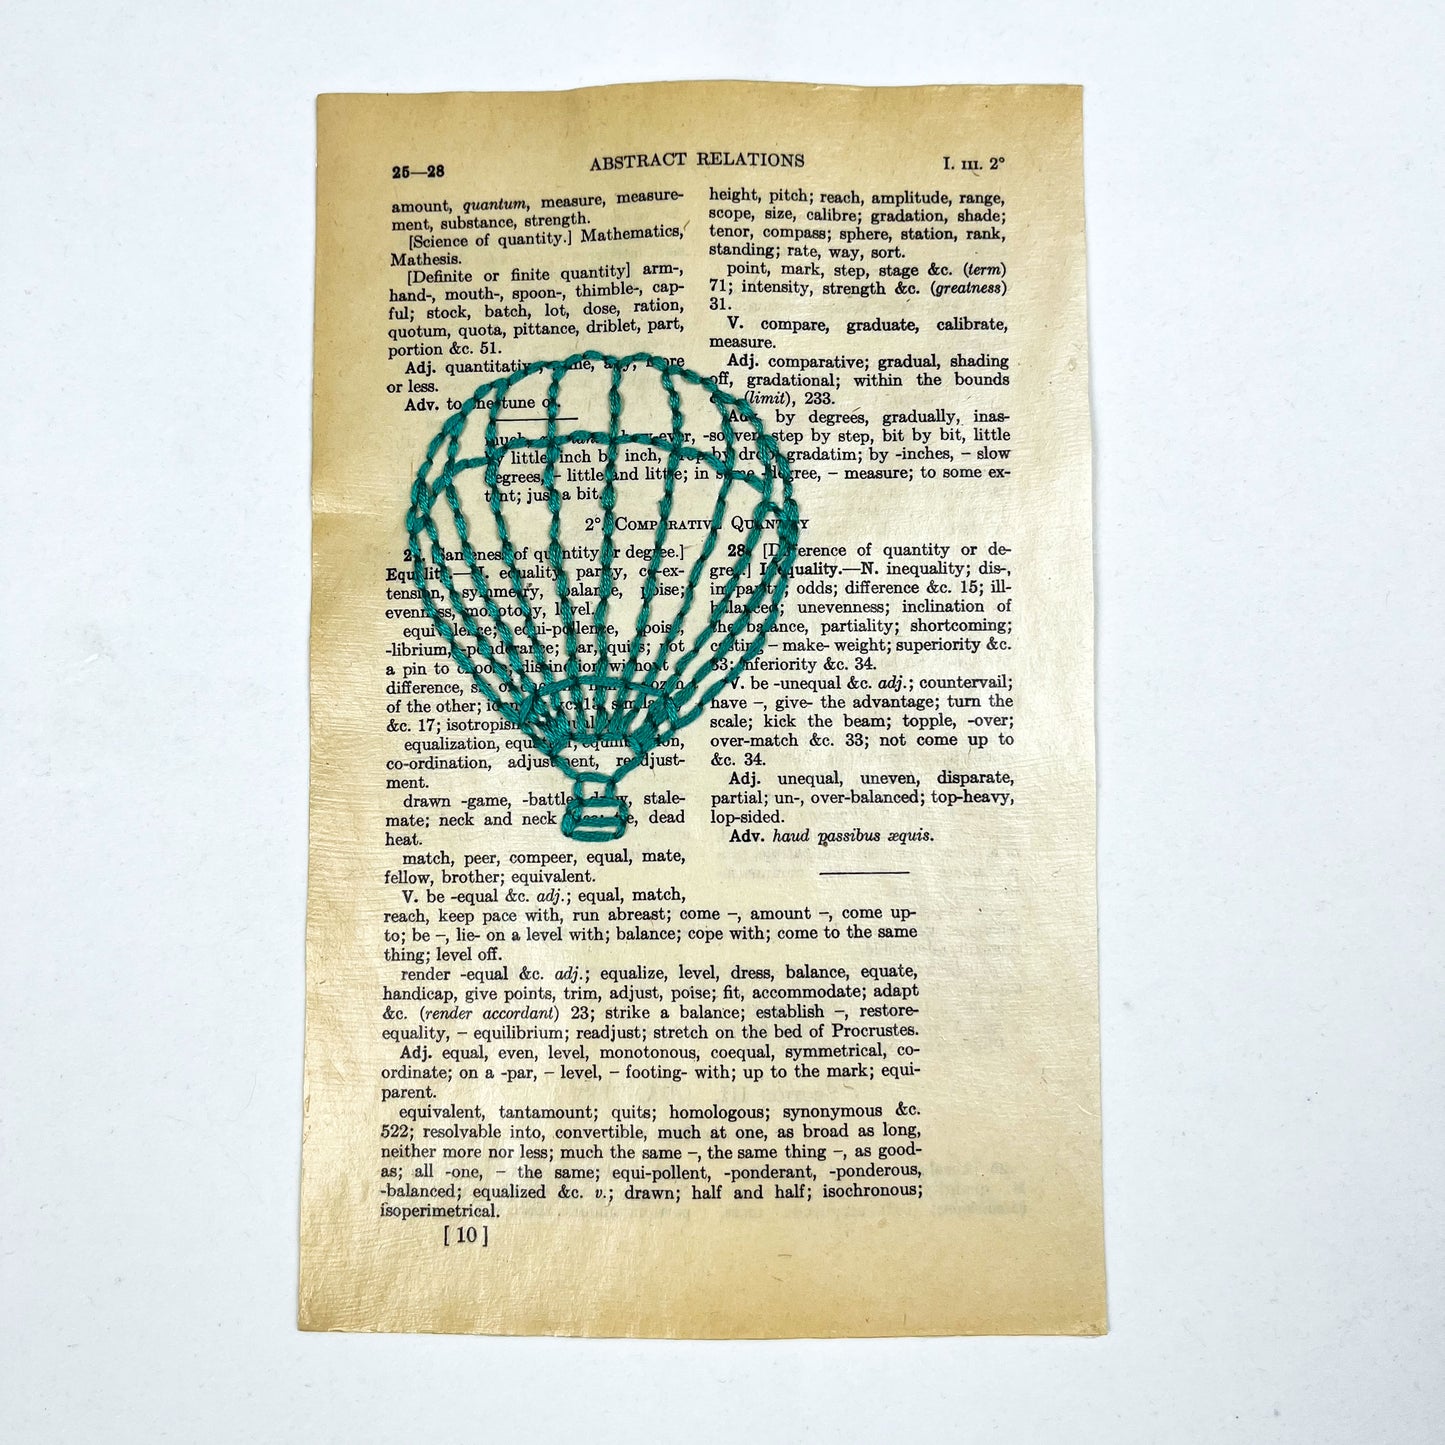 a vintage thesaurus page, hand stitched over with an outline of a hot air balloon in teal thread on a white background